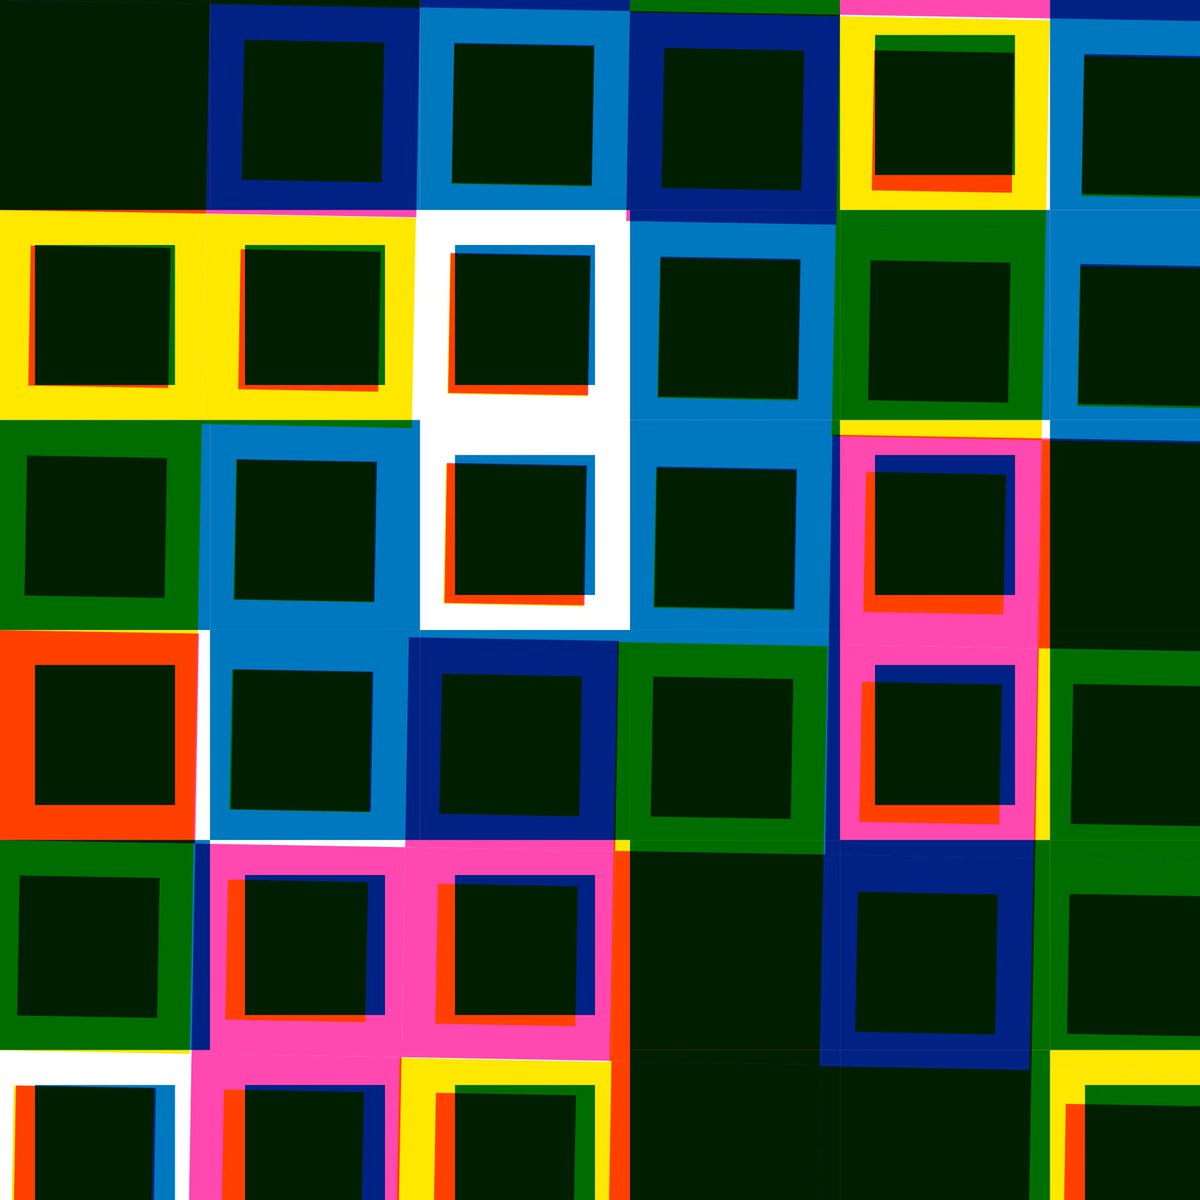 This is Dissonance #1, owned by @PigeonHands. The core idea for the algorithm is to superimpose three grid layers made of basic geometric shapes and use only the three primary colors and a random rotation of each grid to let additional colors and patterns emerge.